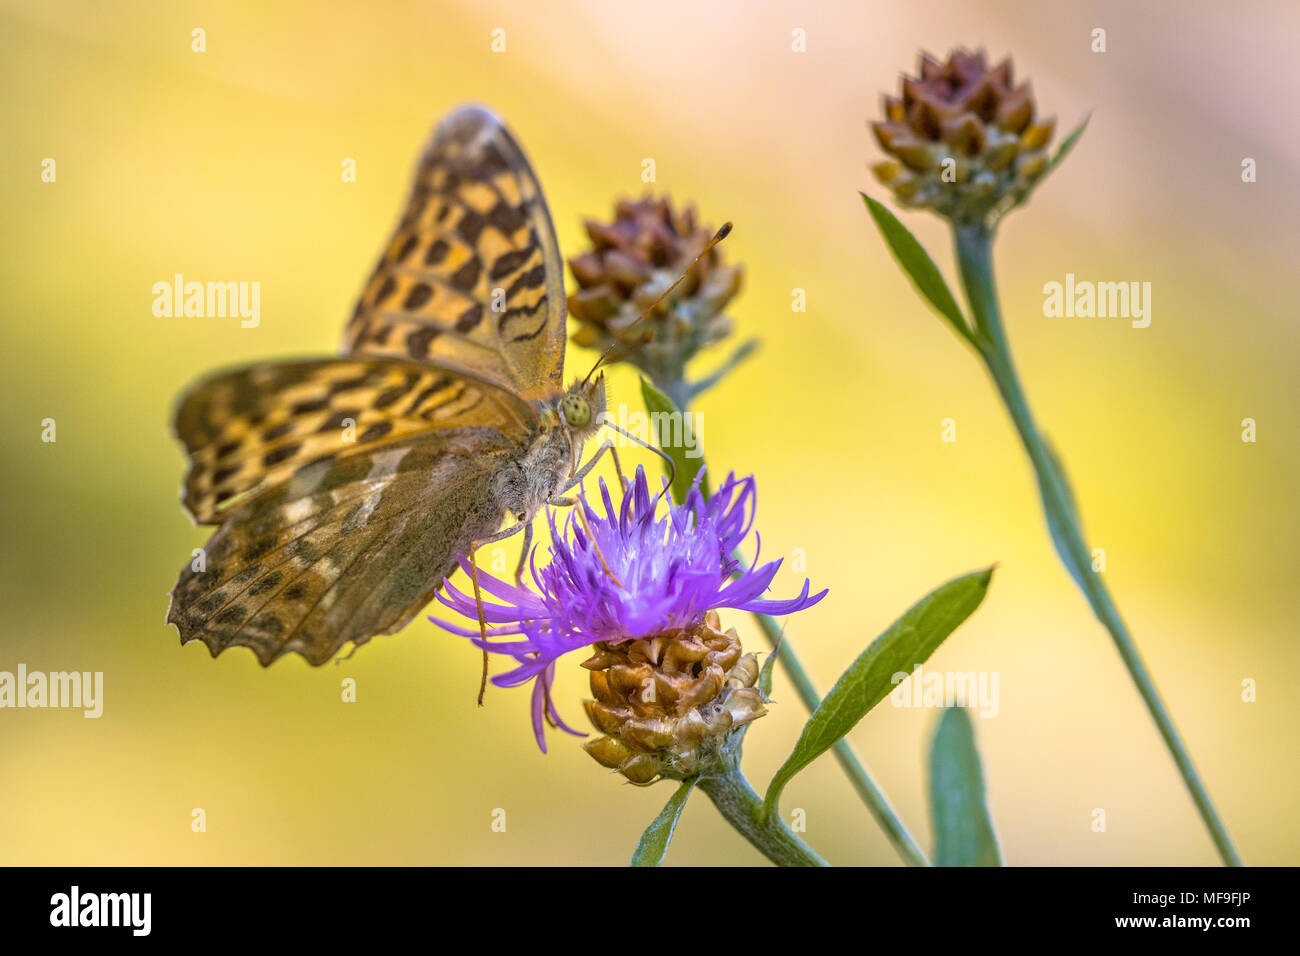 Silver-washed fritillary (Argynnis paphia) butterfly perched on flower of Brown knapweed (Centaurea jacea) with bright colored background Stock Photo